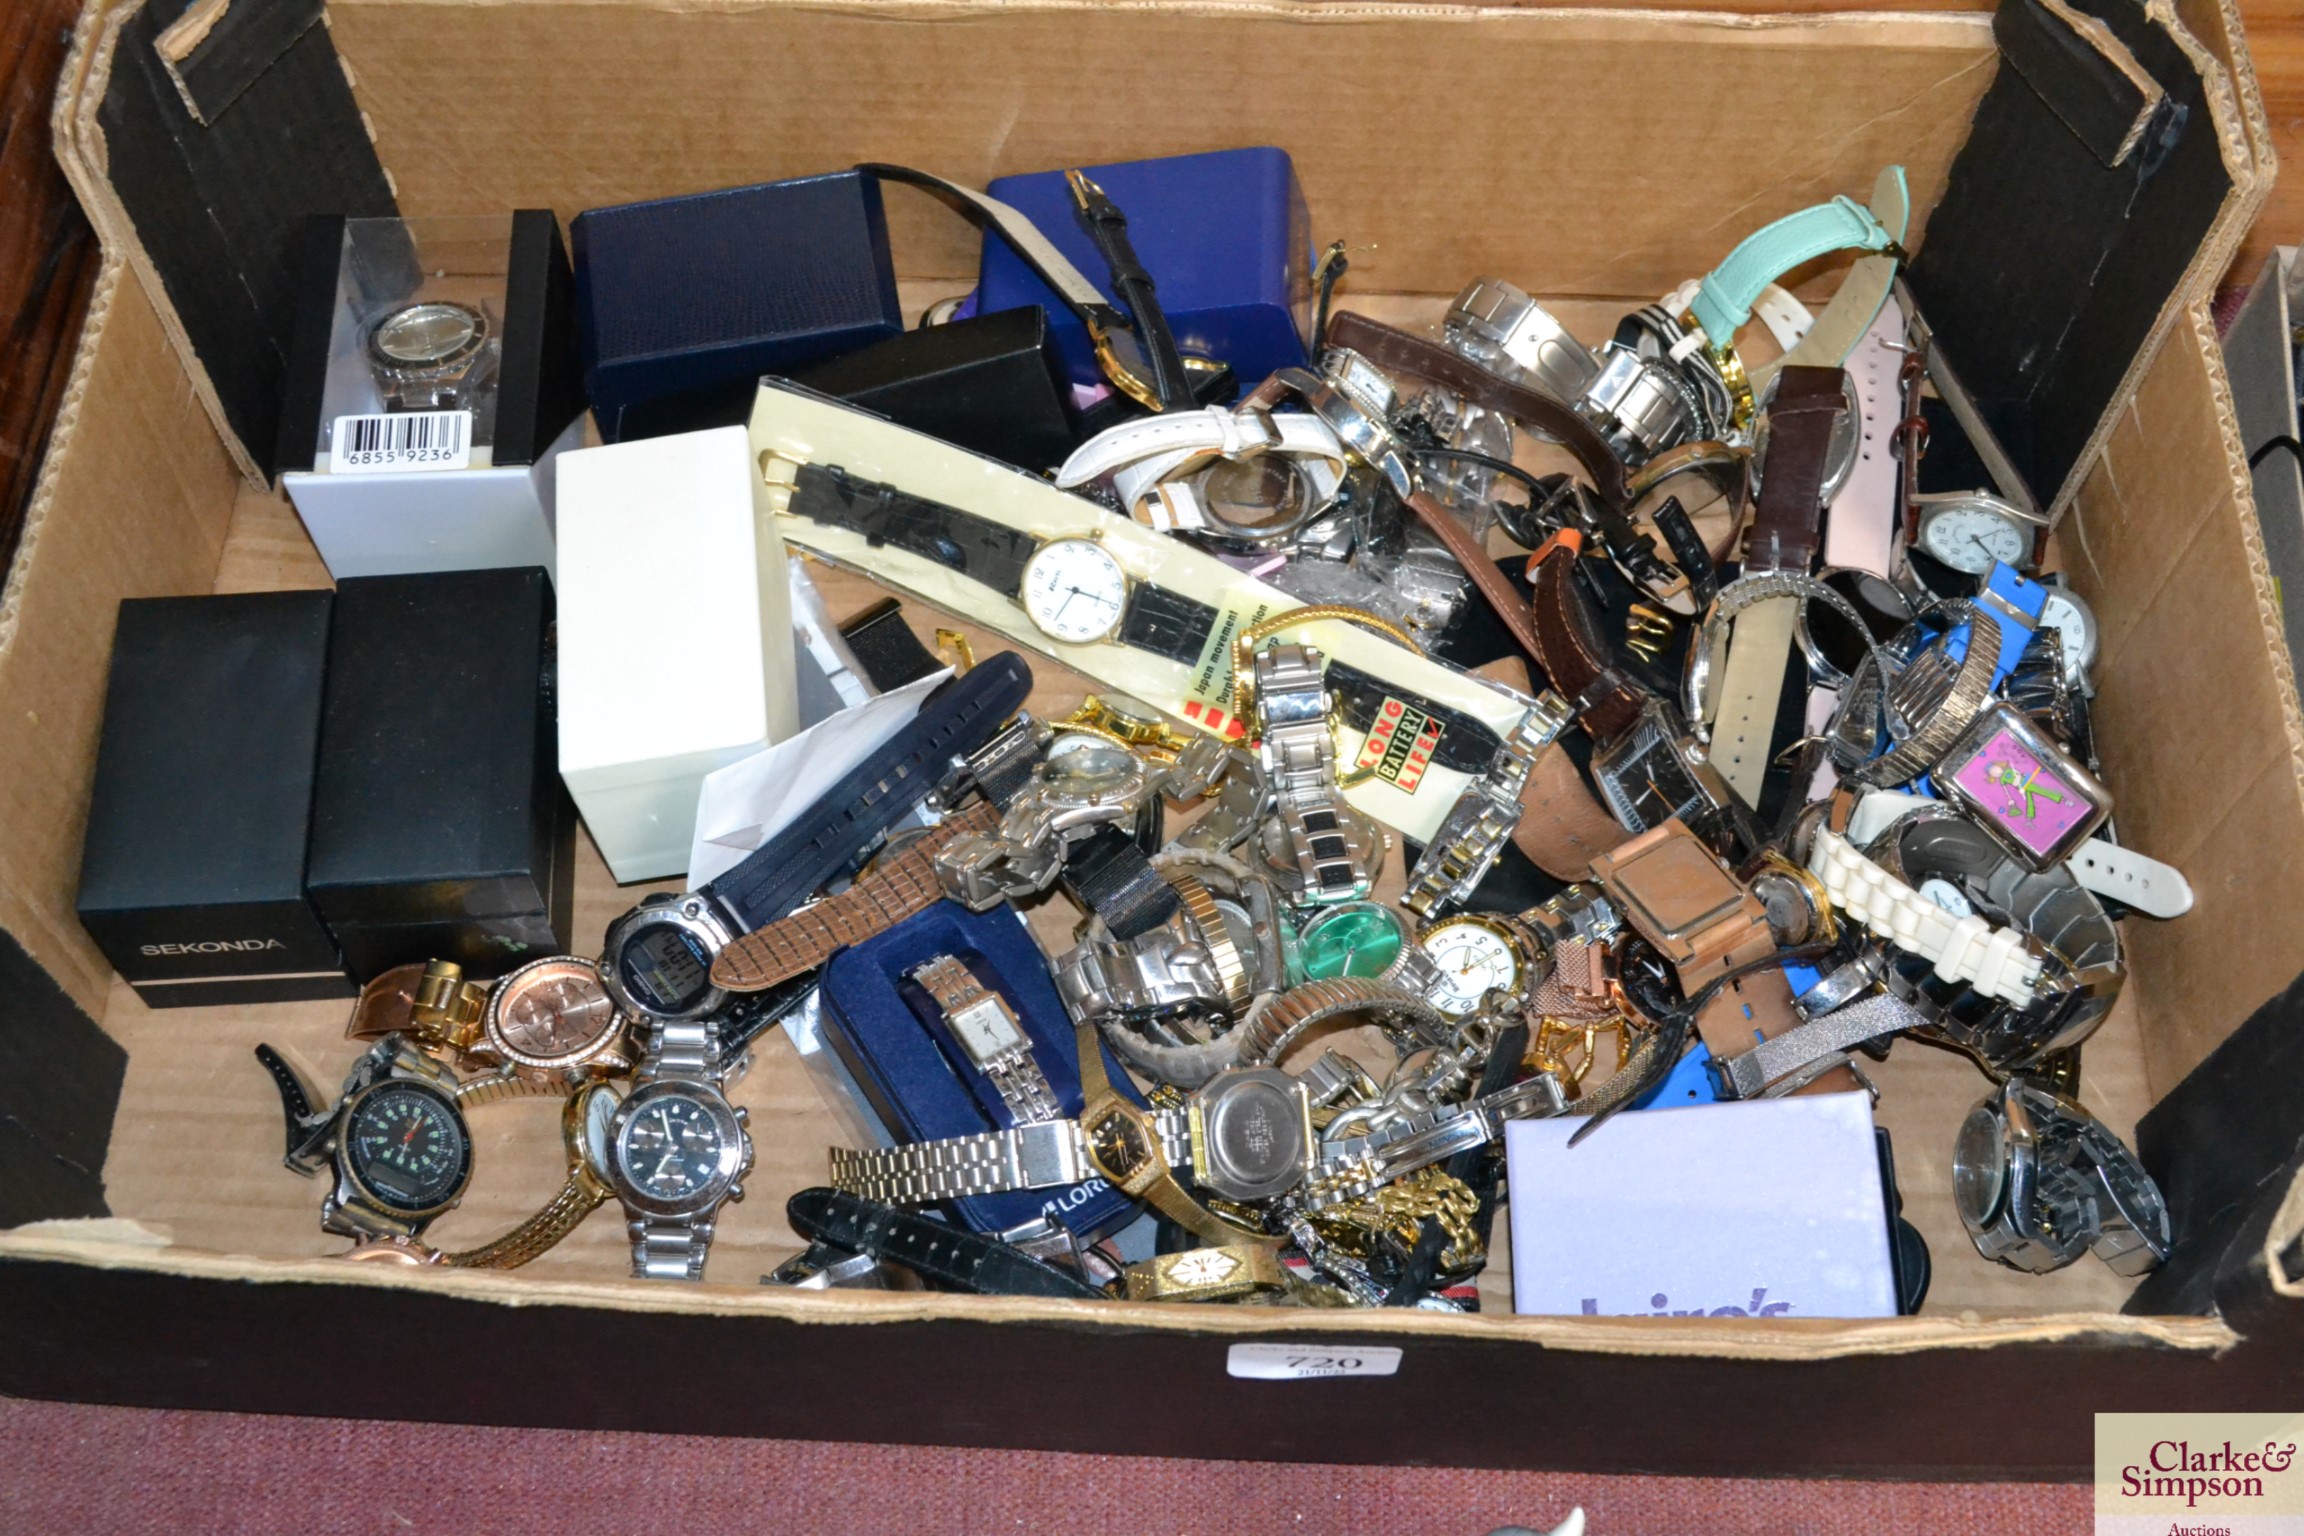 A large quantity of various wrist watches